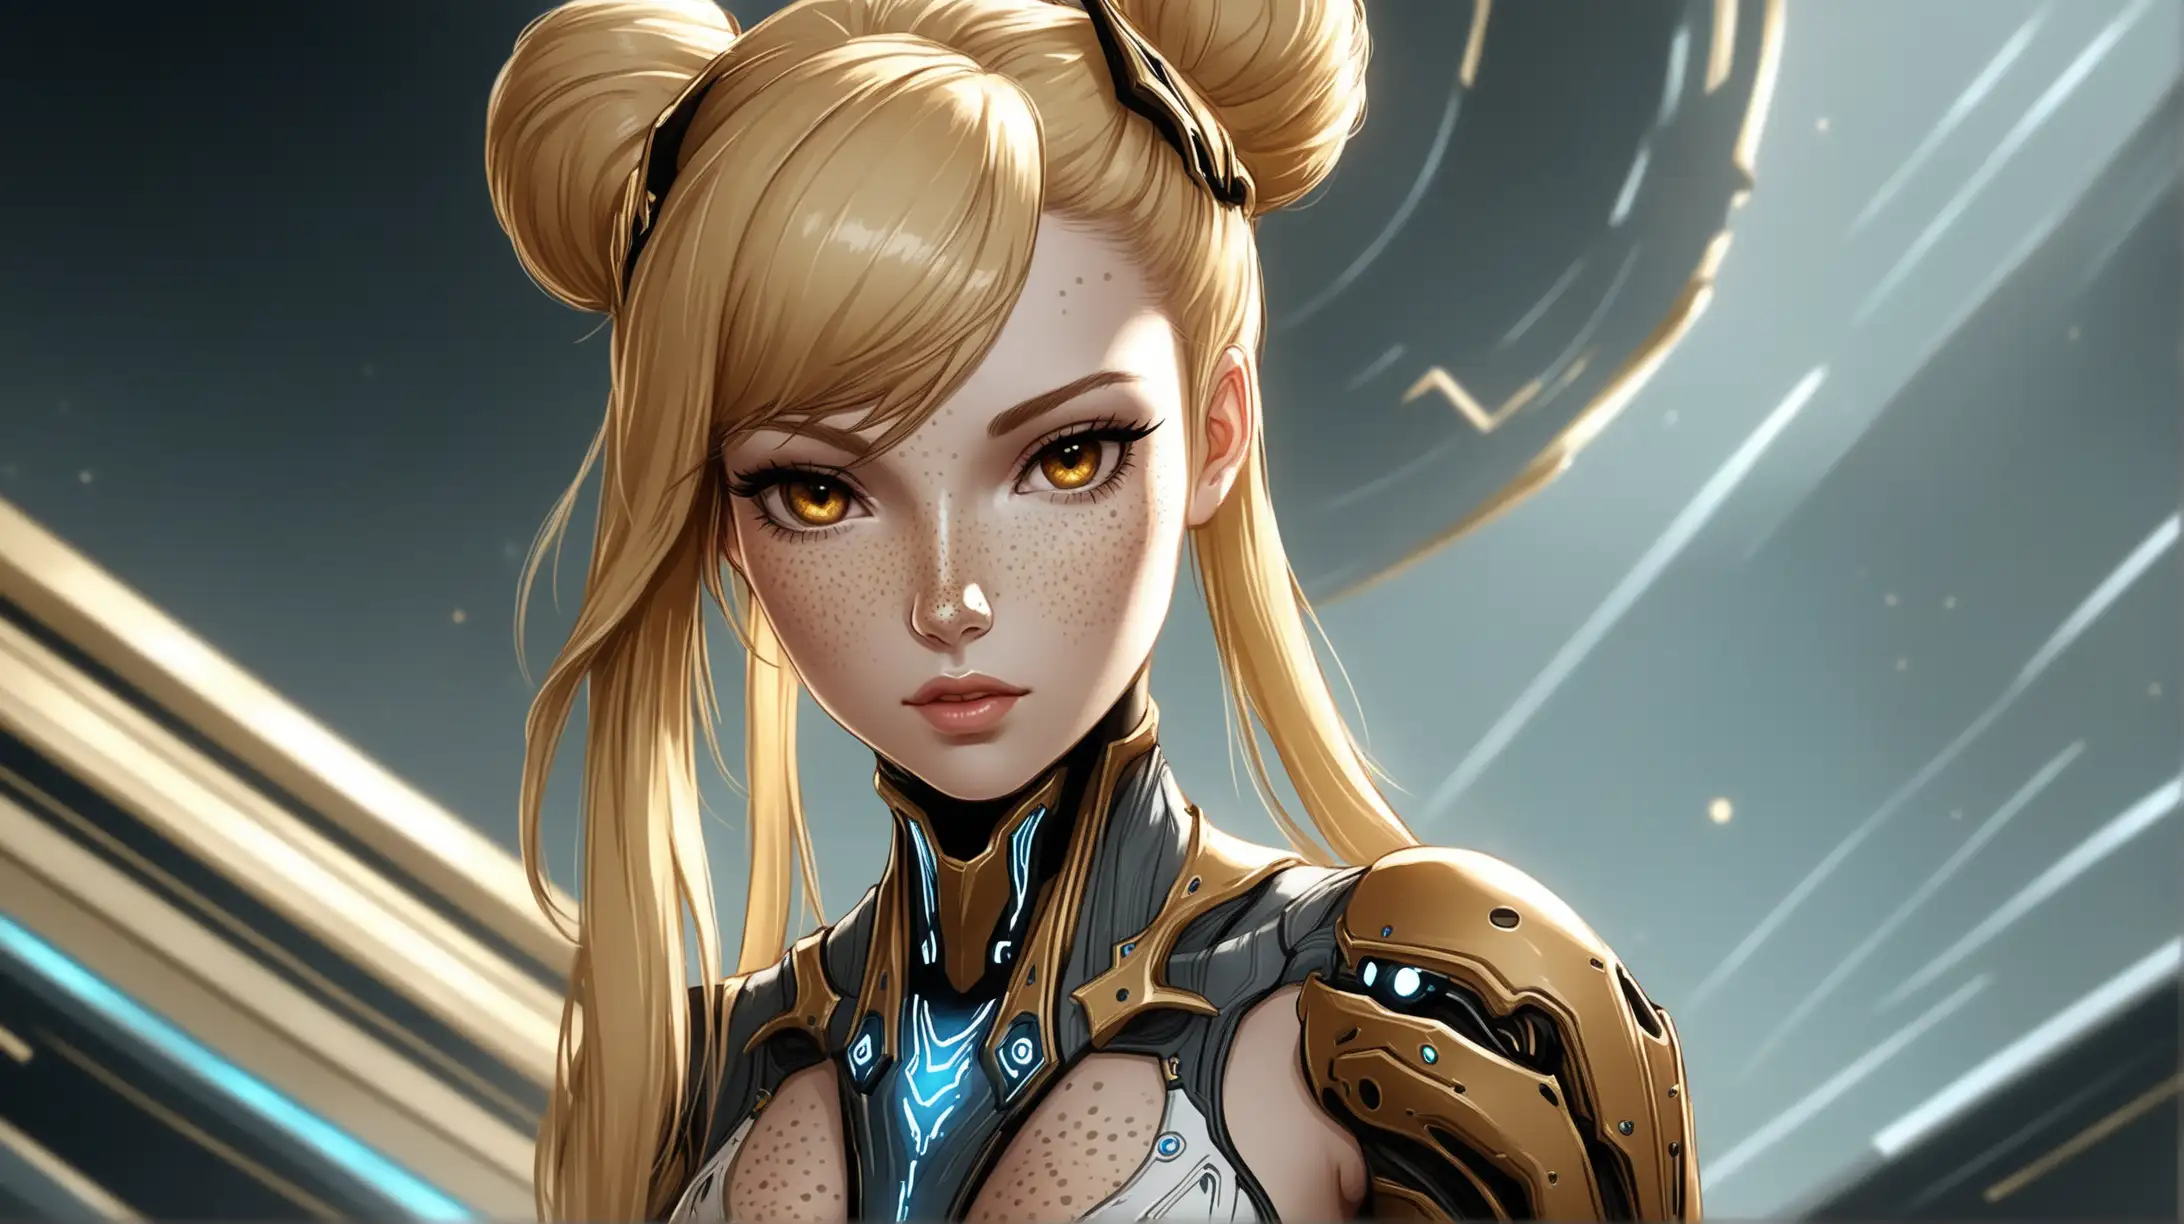 Draw a woman, long blonde hair in a bun, gold eyes, freckles, perky figure, outfit inspired from the game Warframe, high quality, leaning in, close up, outdoors, seductive, cleavage, natural lighting, adoring gaze toward the viewer